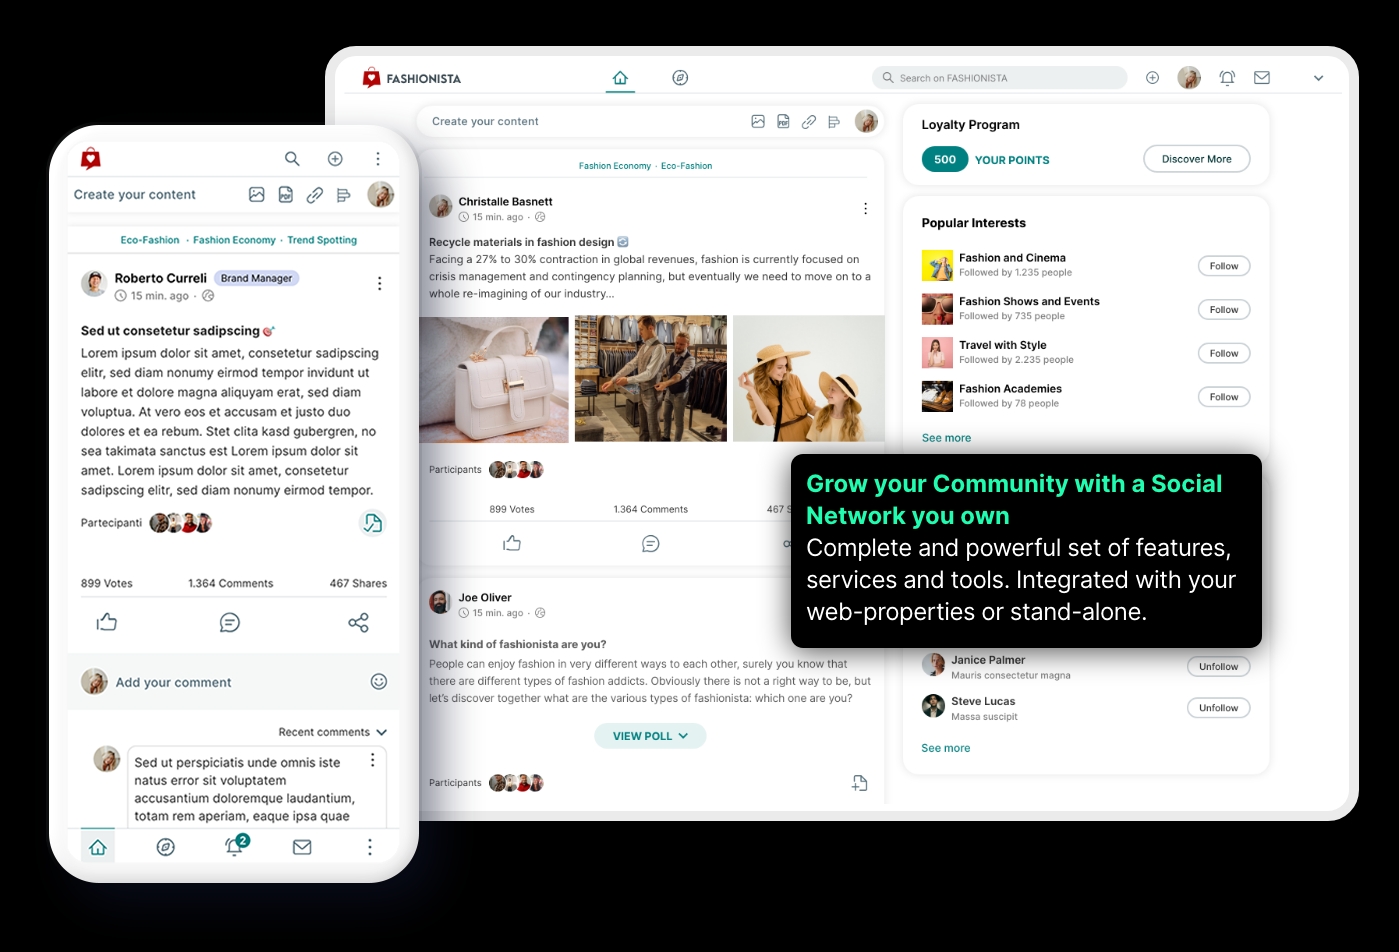 Grow your Community with a owned Social Network: Complete and powerful set of features, services and tools. Integrated with your web-properties or stand-alone.